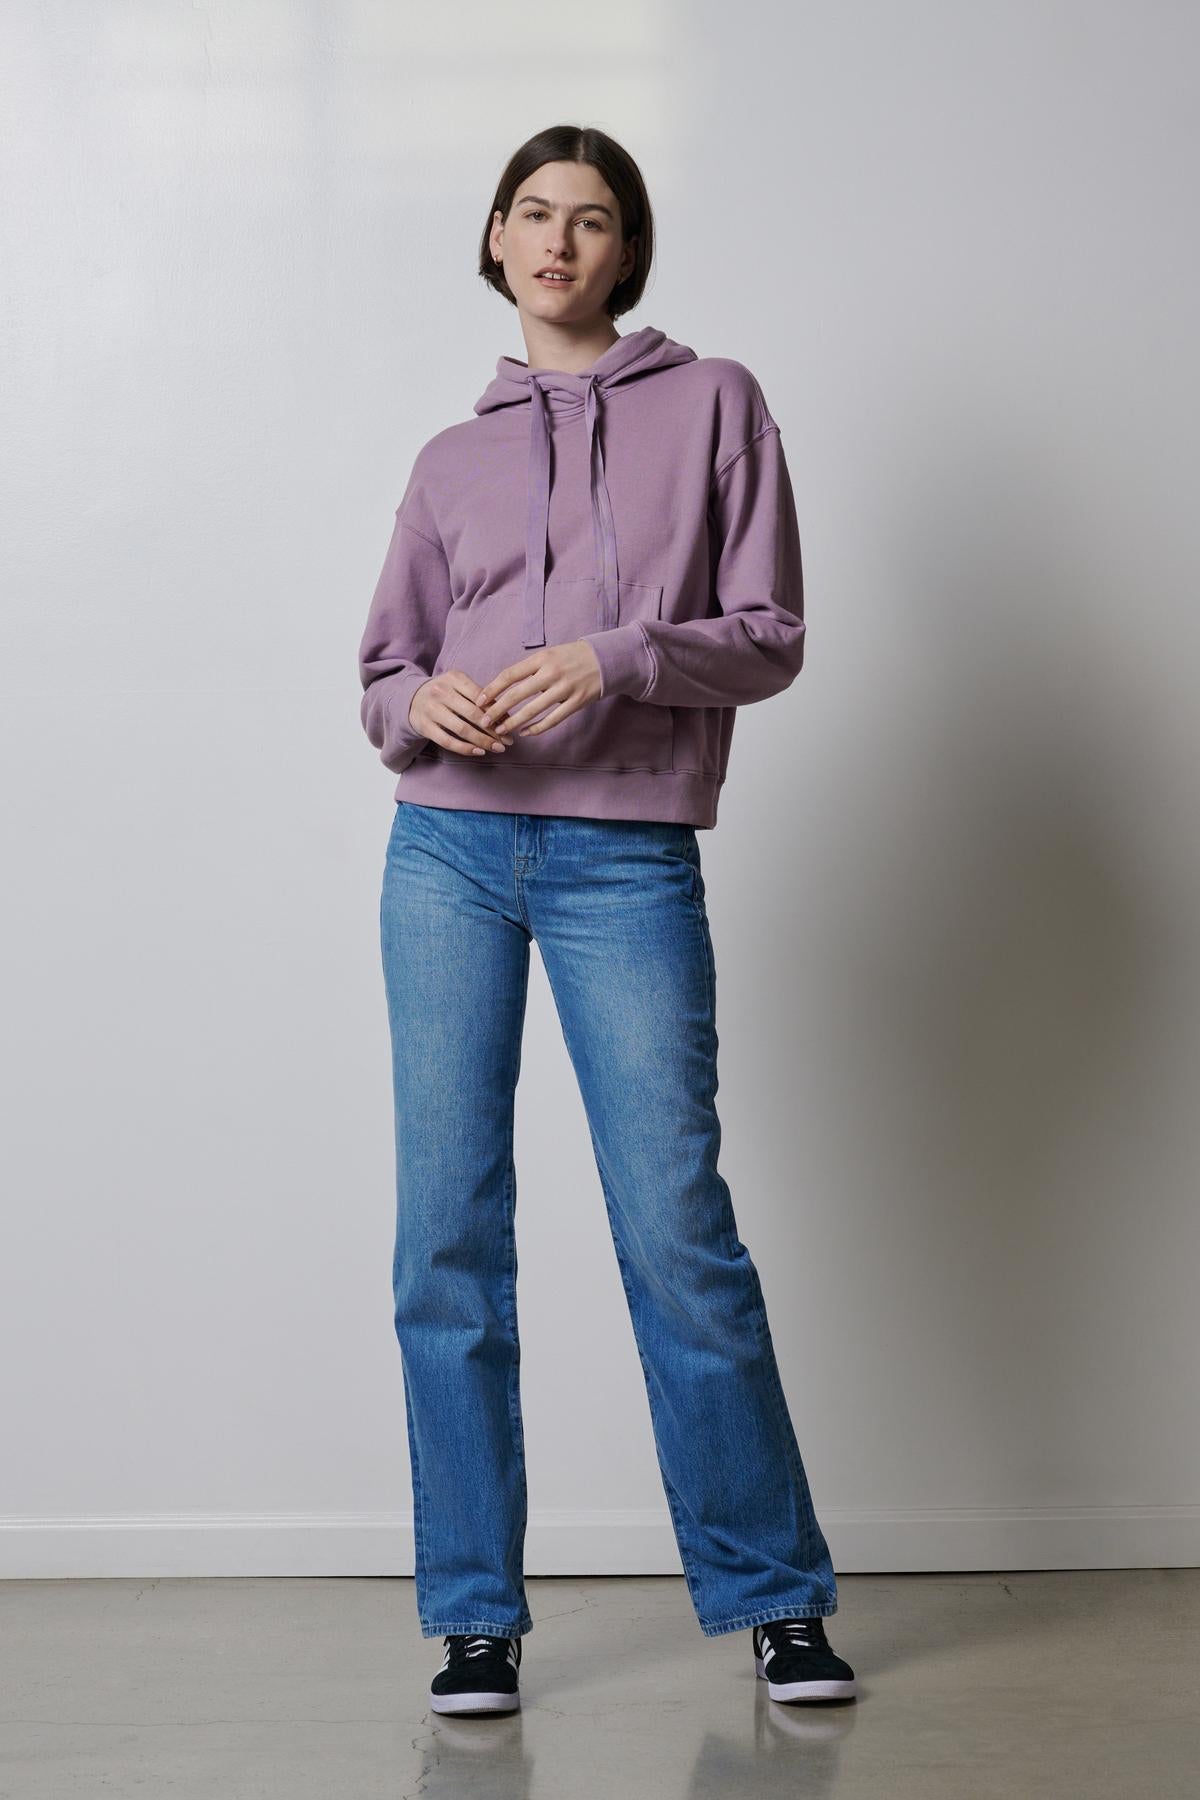   A woman wearing an OJAI HOODIE by Velvet by Jenny Graham and blue jeans. 